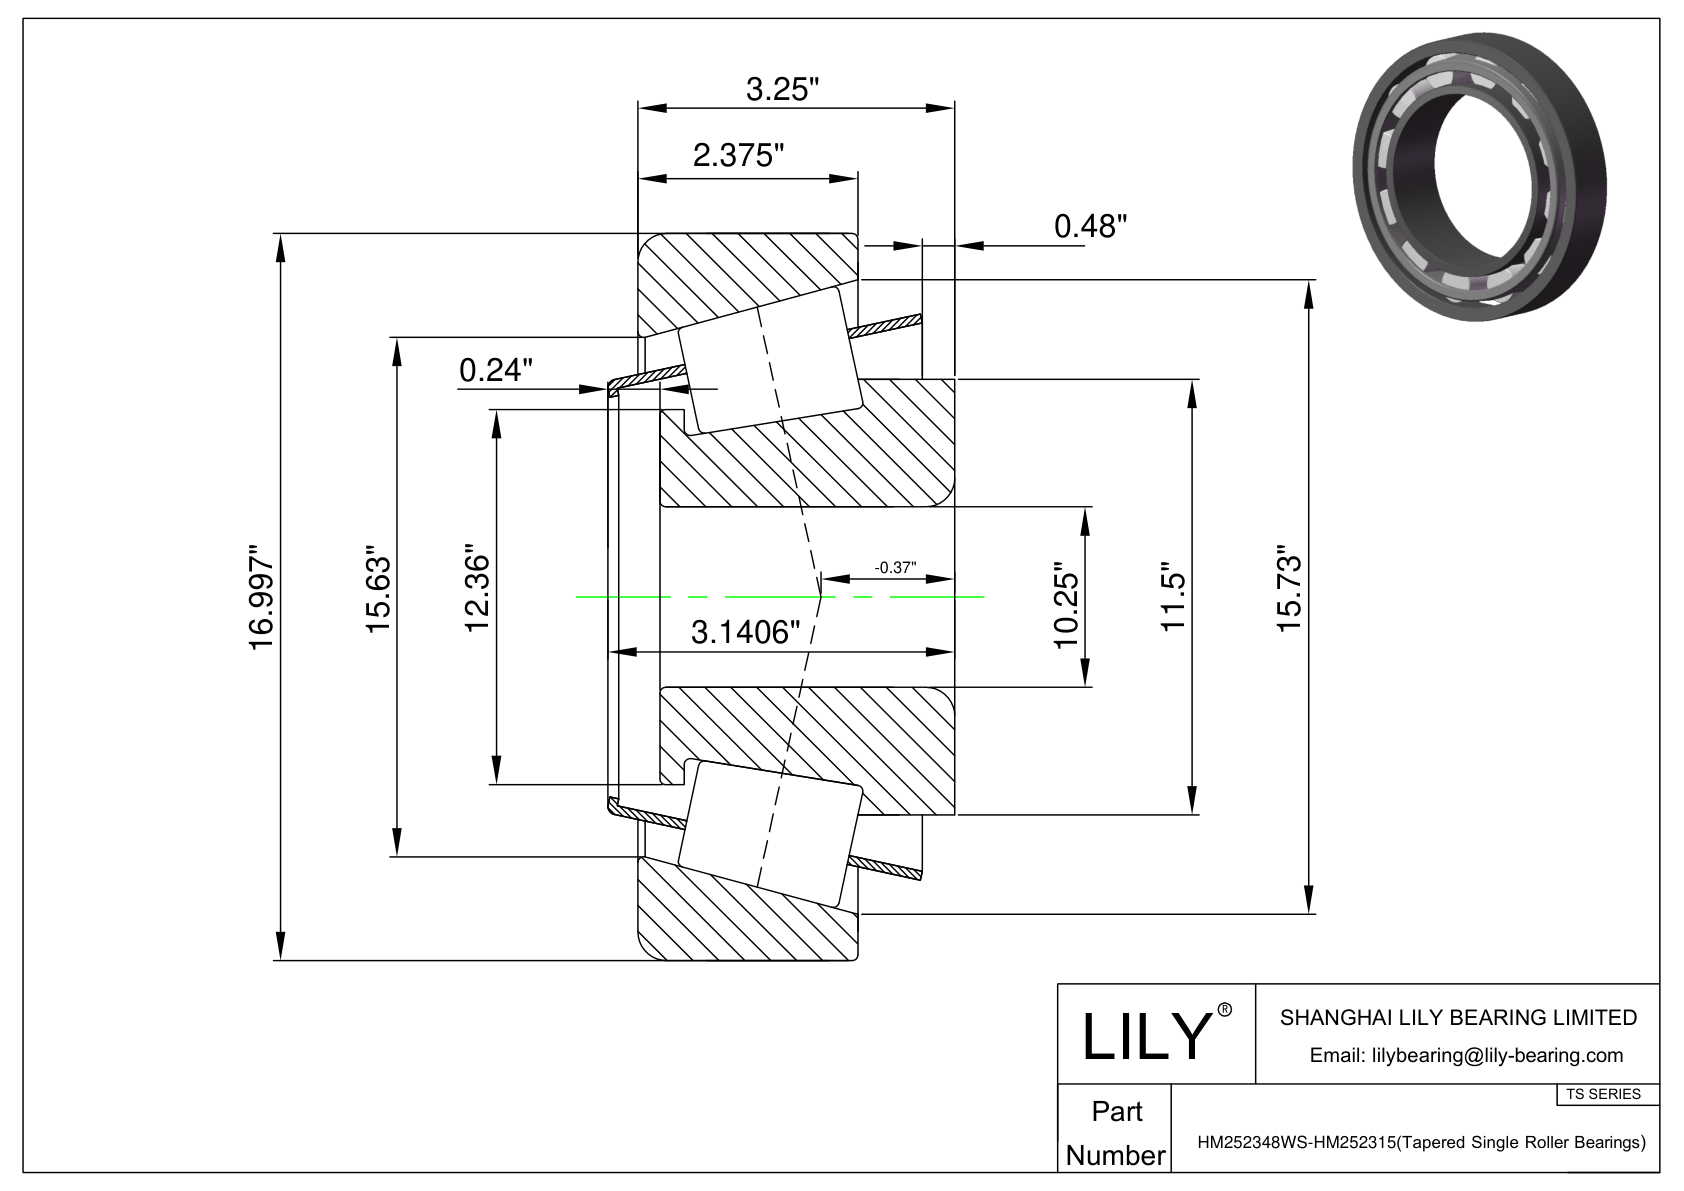 HM252348WS-HM252315 TS (Tapered Single Roller Bearings) (Imperial) cad drawing